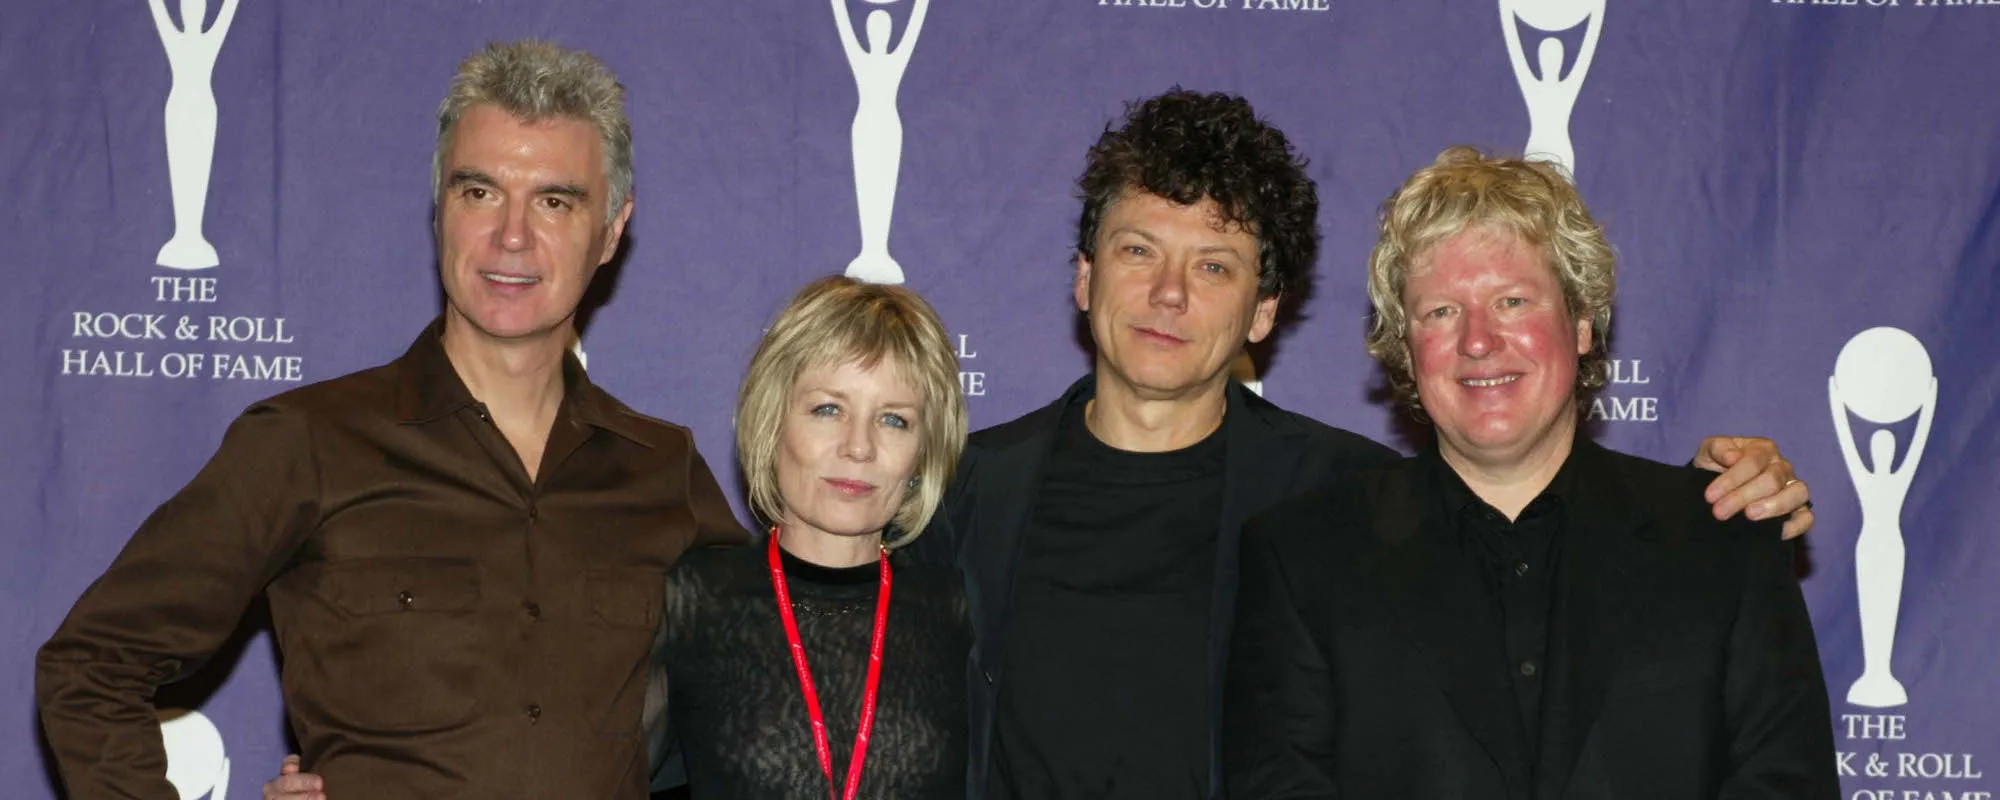 Tina Weymouth Says Talking Heads Bandmate David Byrne is “Insecure” and Won’t Refer to Her by Name